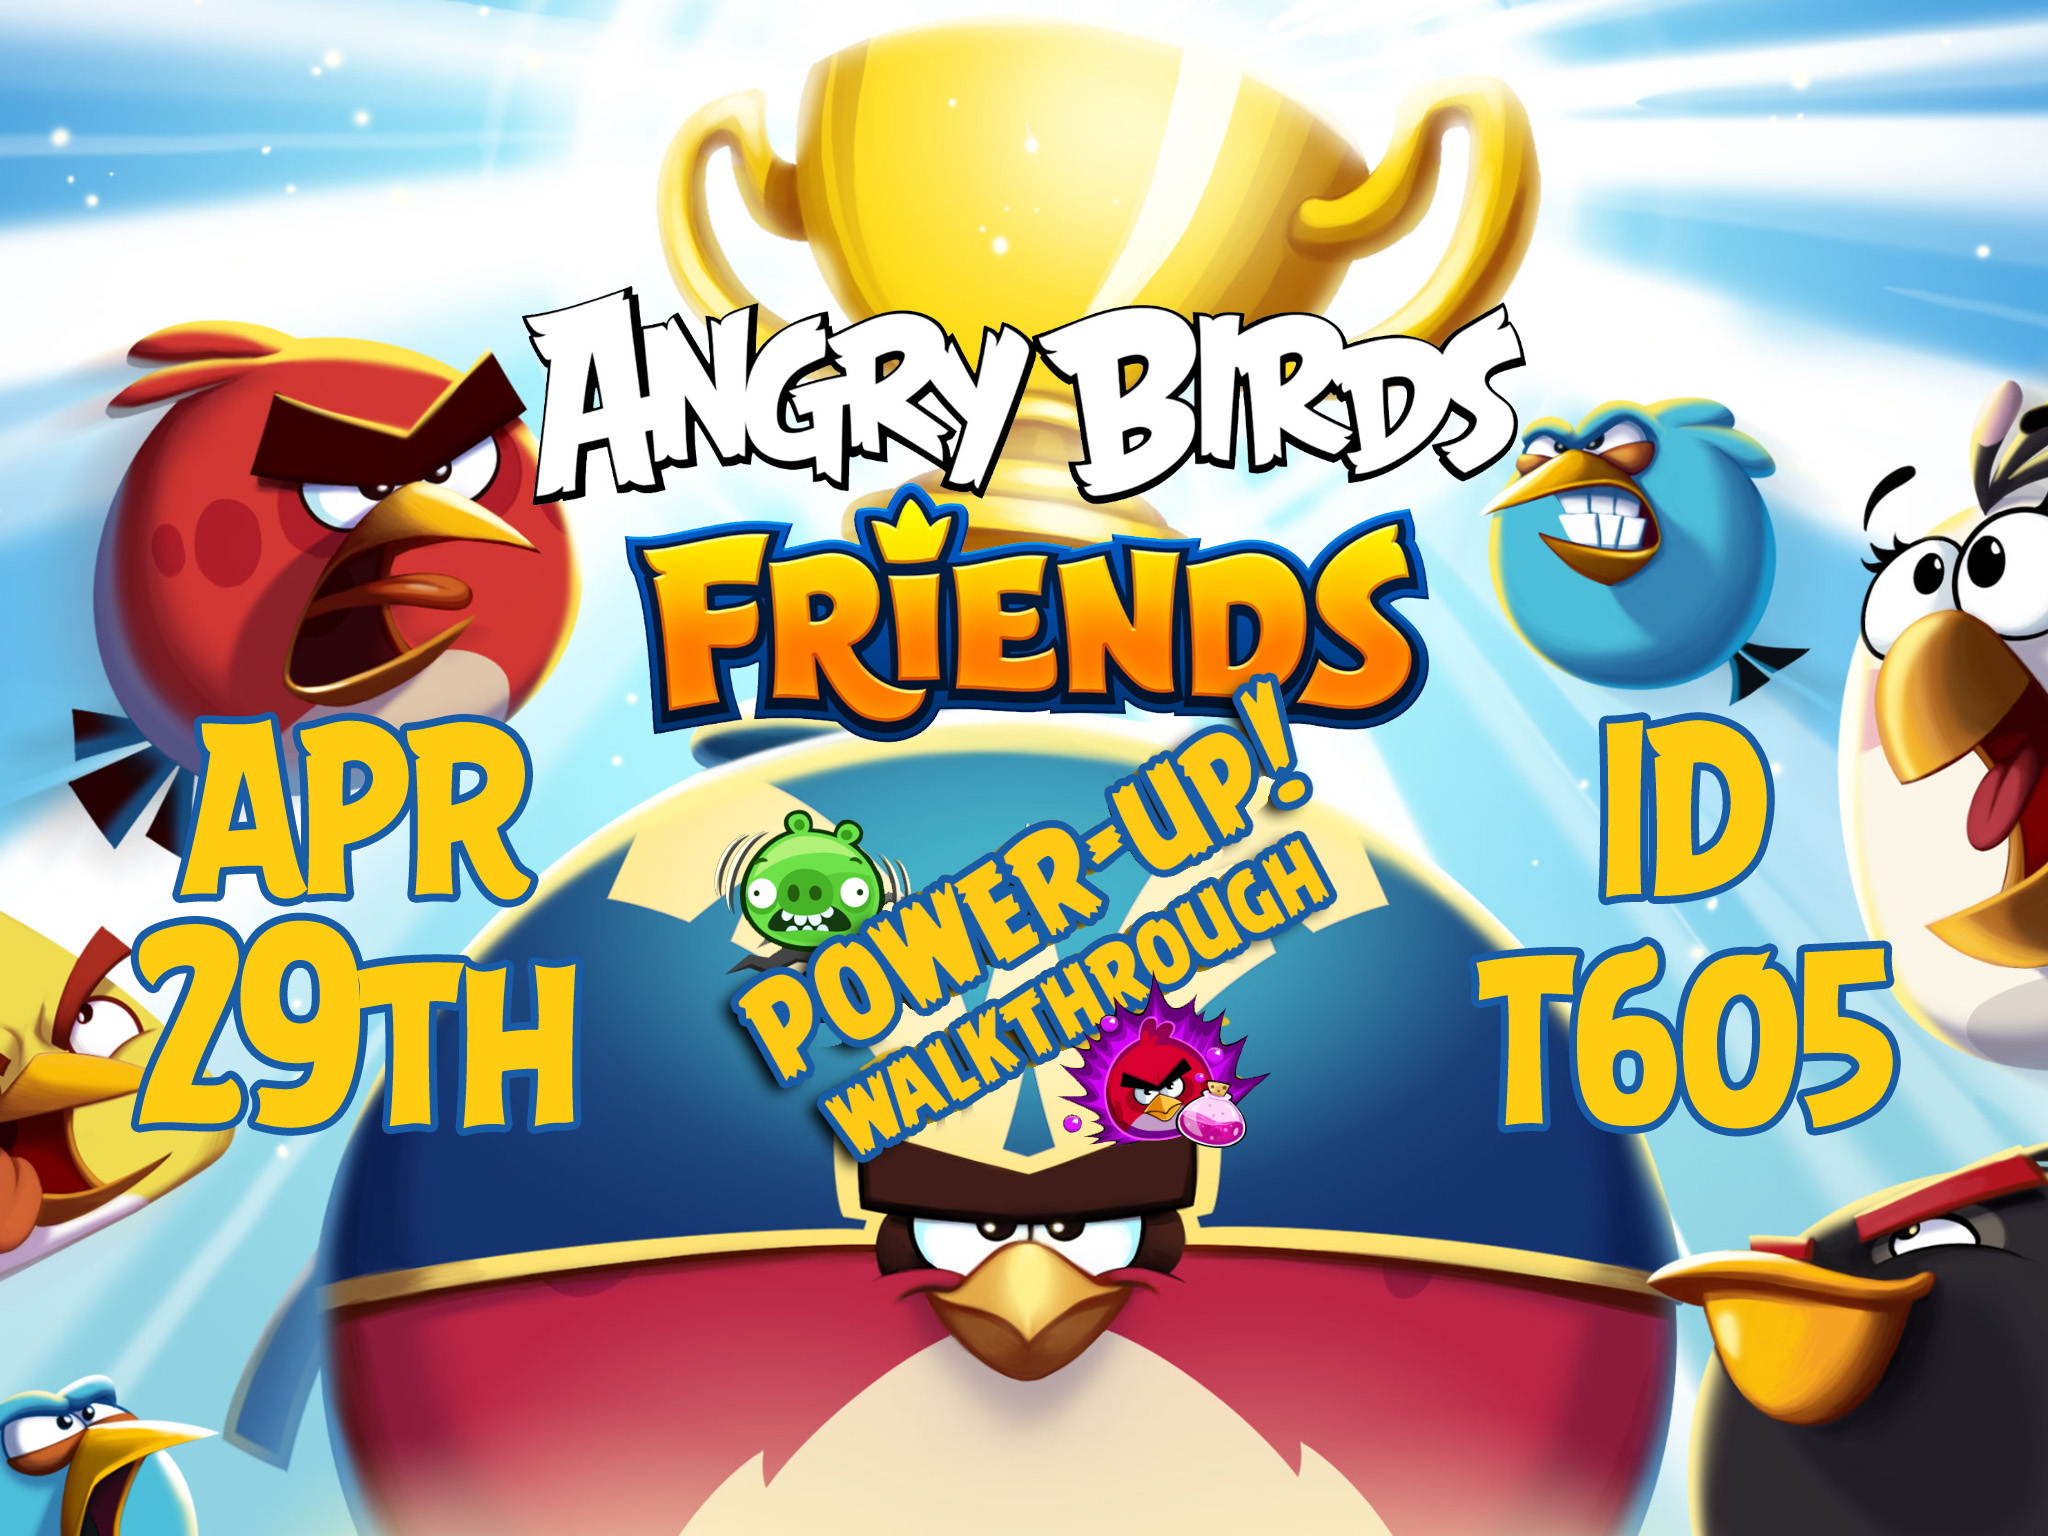 Angry-Birds-Friends-Tournament-T605-Feature-Image-PU